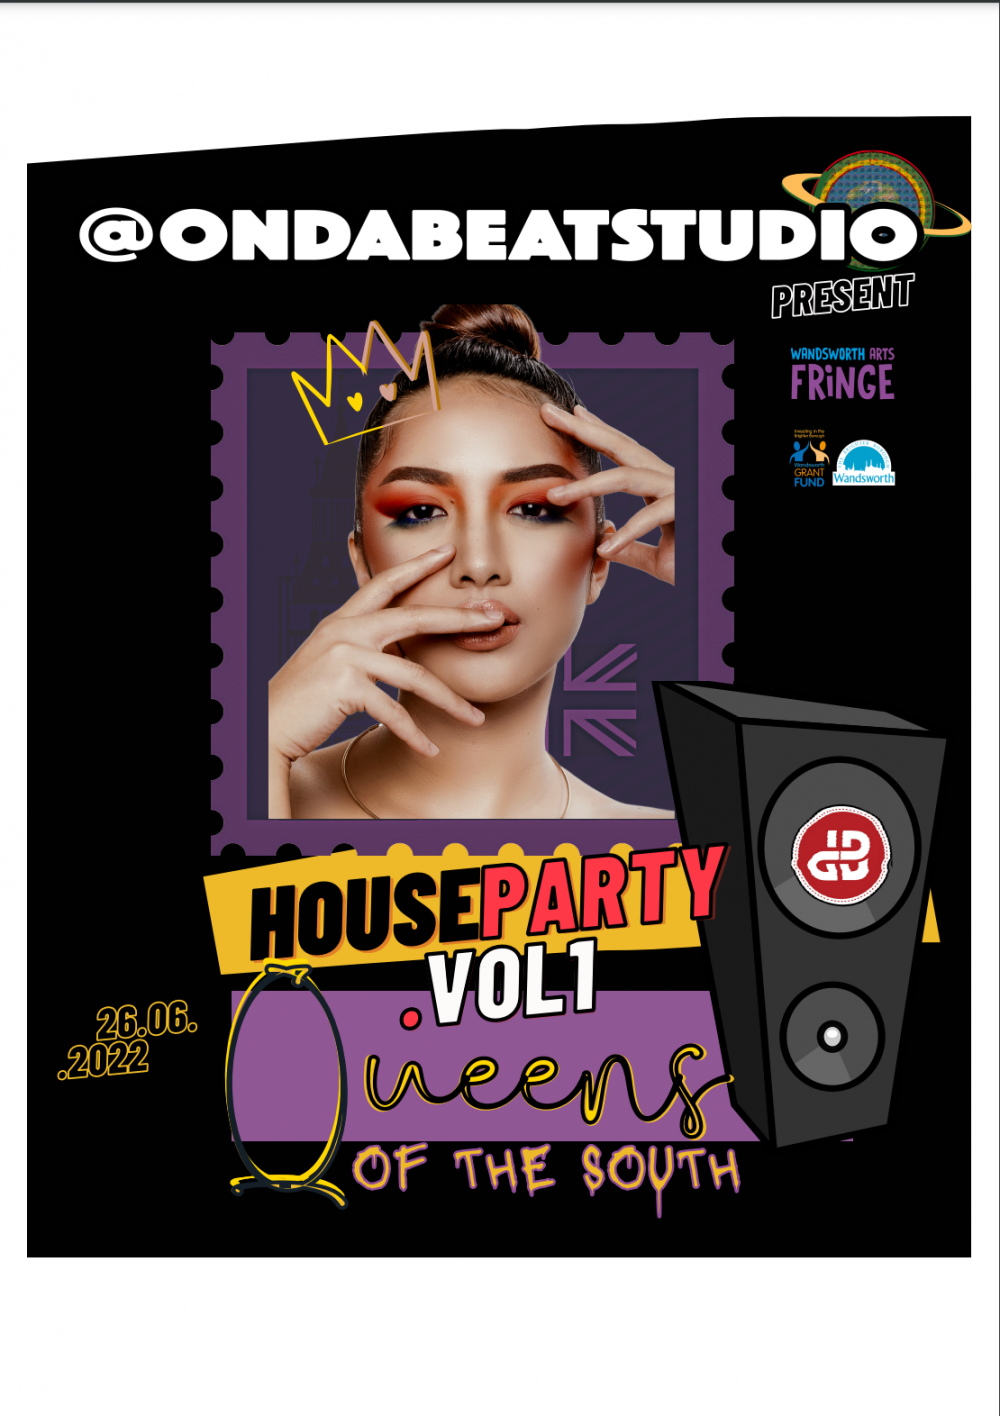 House Party vol. 1 - On da beat studio present queens of the south